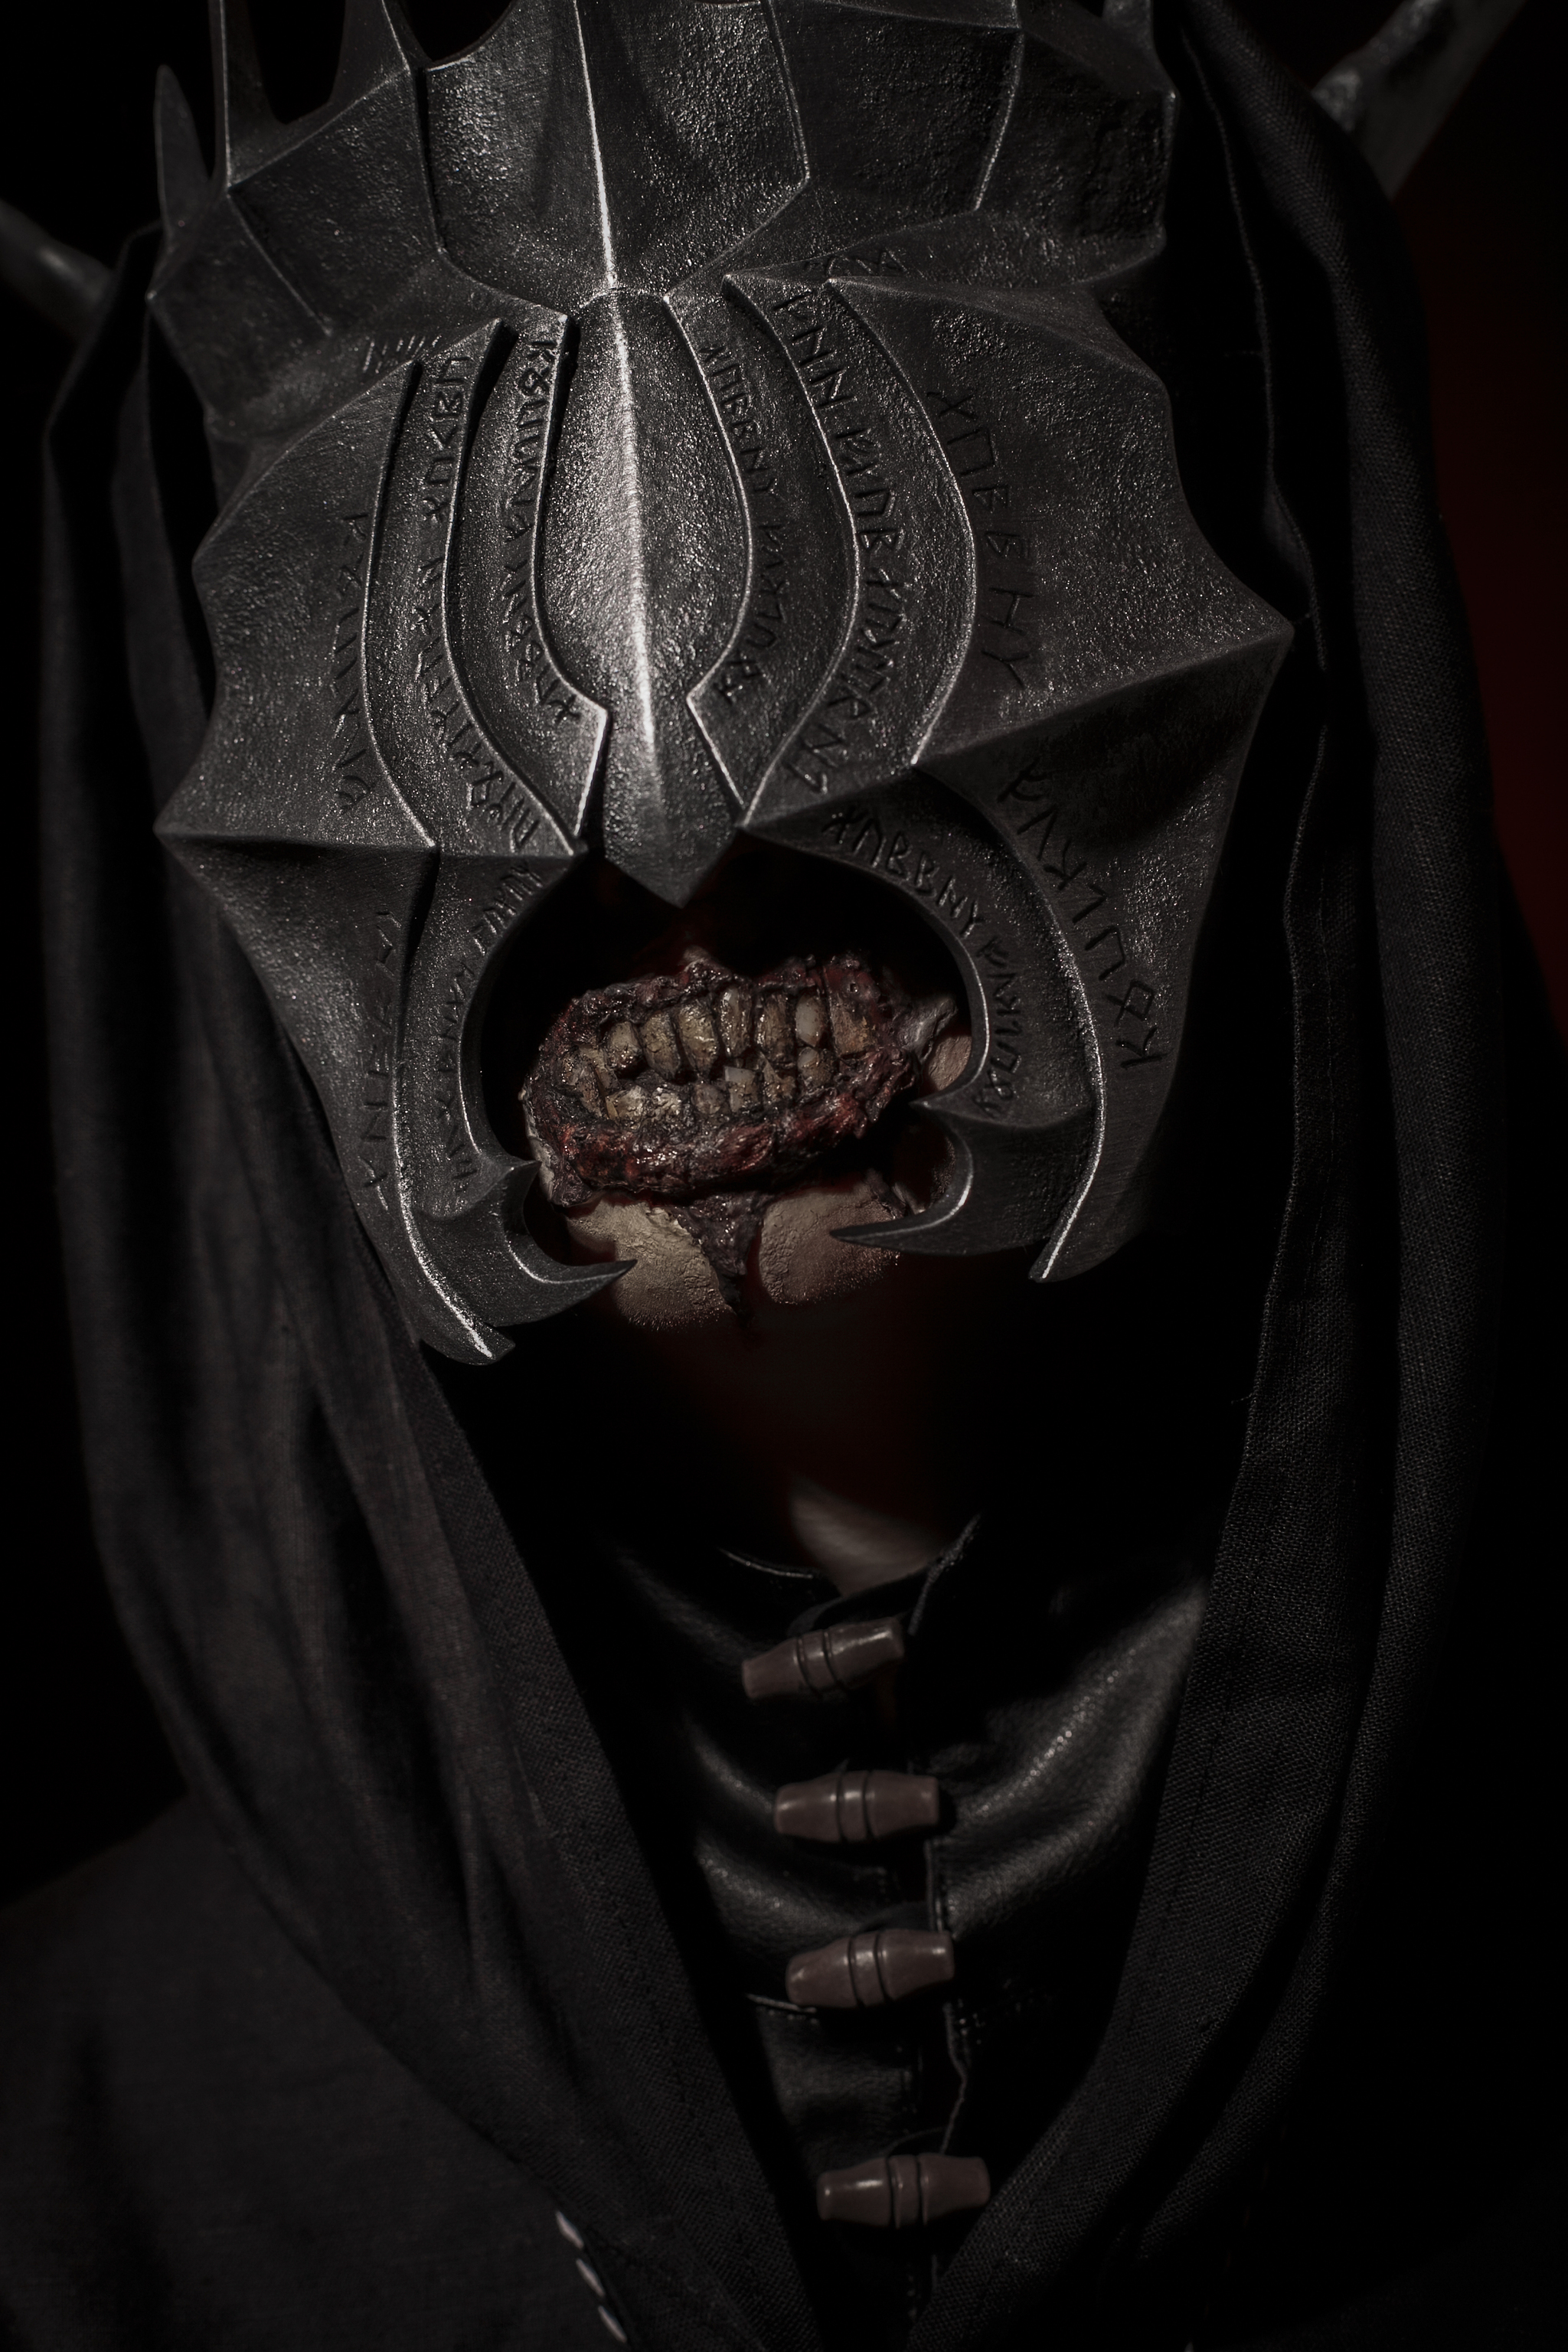 My cosplay of the Herald of Sauron (Lord of the Rings) - My, Cosplayers, Cosplay, PHOTOSESSION, The photo, Fantasy, Lord of the Rings, Costume, Fashion model, Crier, Makeup, Lego, Horror, Craft, Mask, Tolkien, Middle earth, Voice of Mordor, Mordor, Sauron, Ring of omnipotence, Longpost